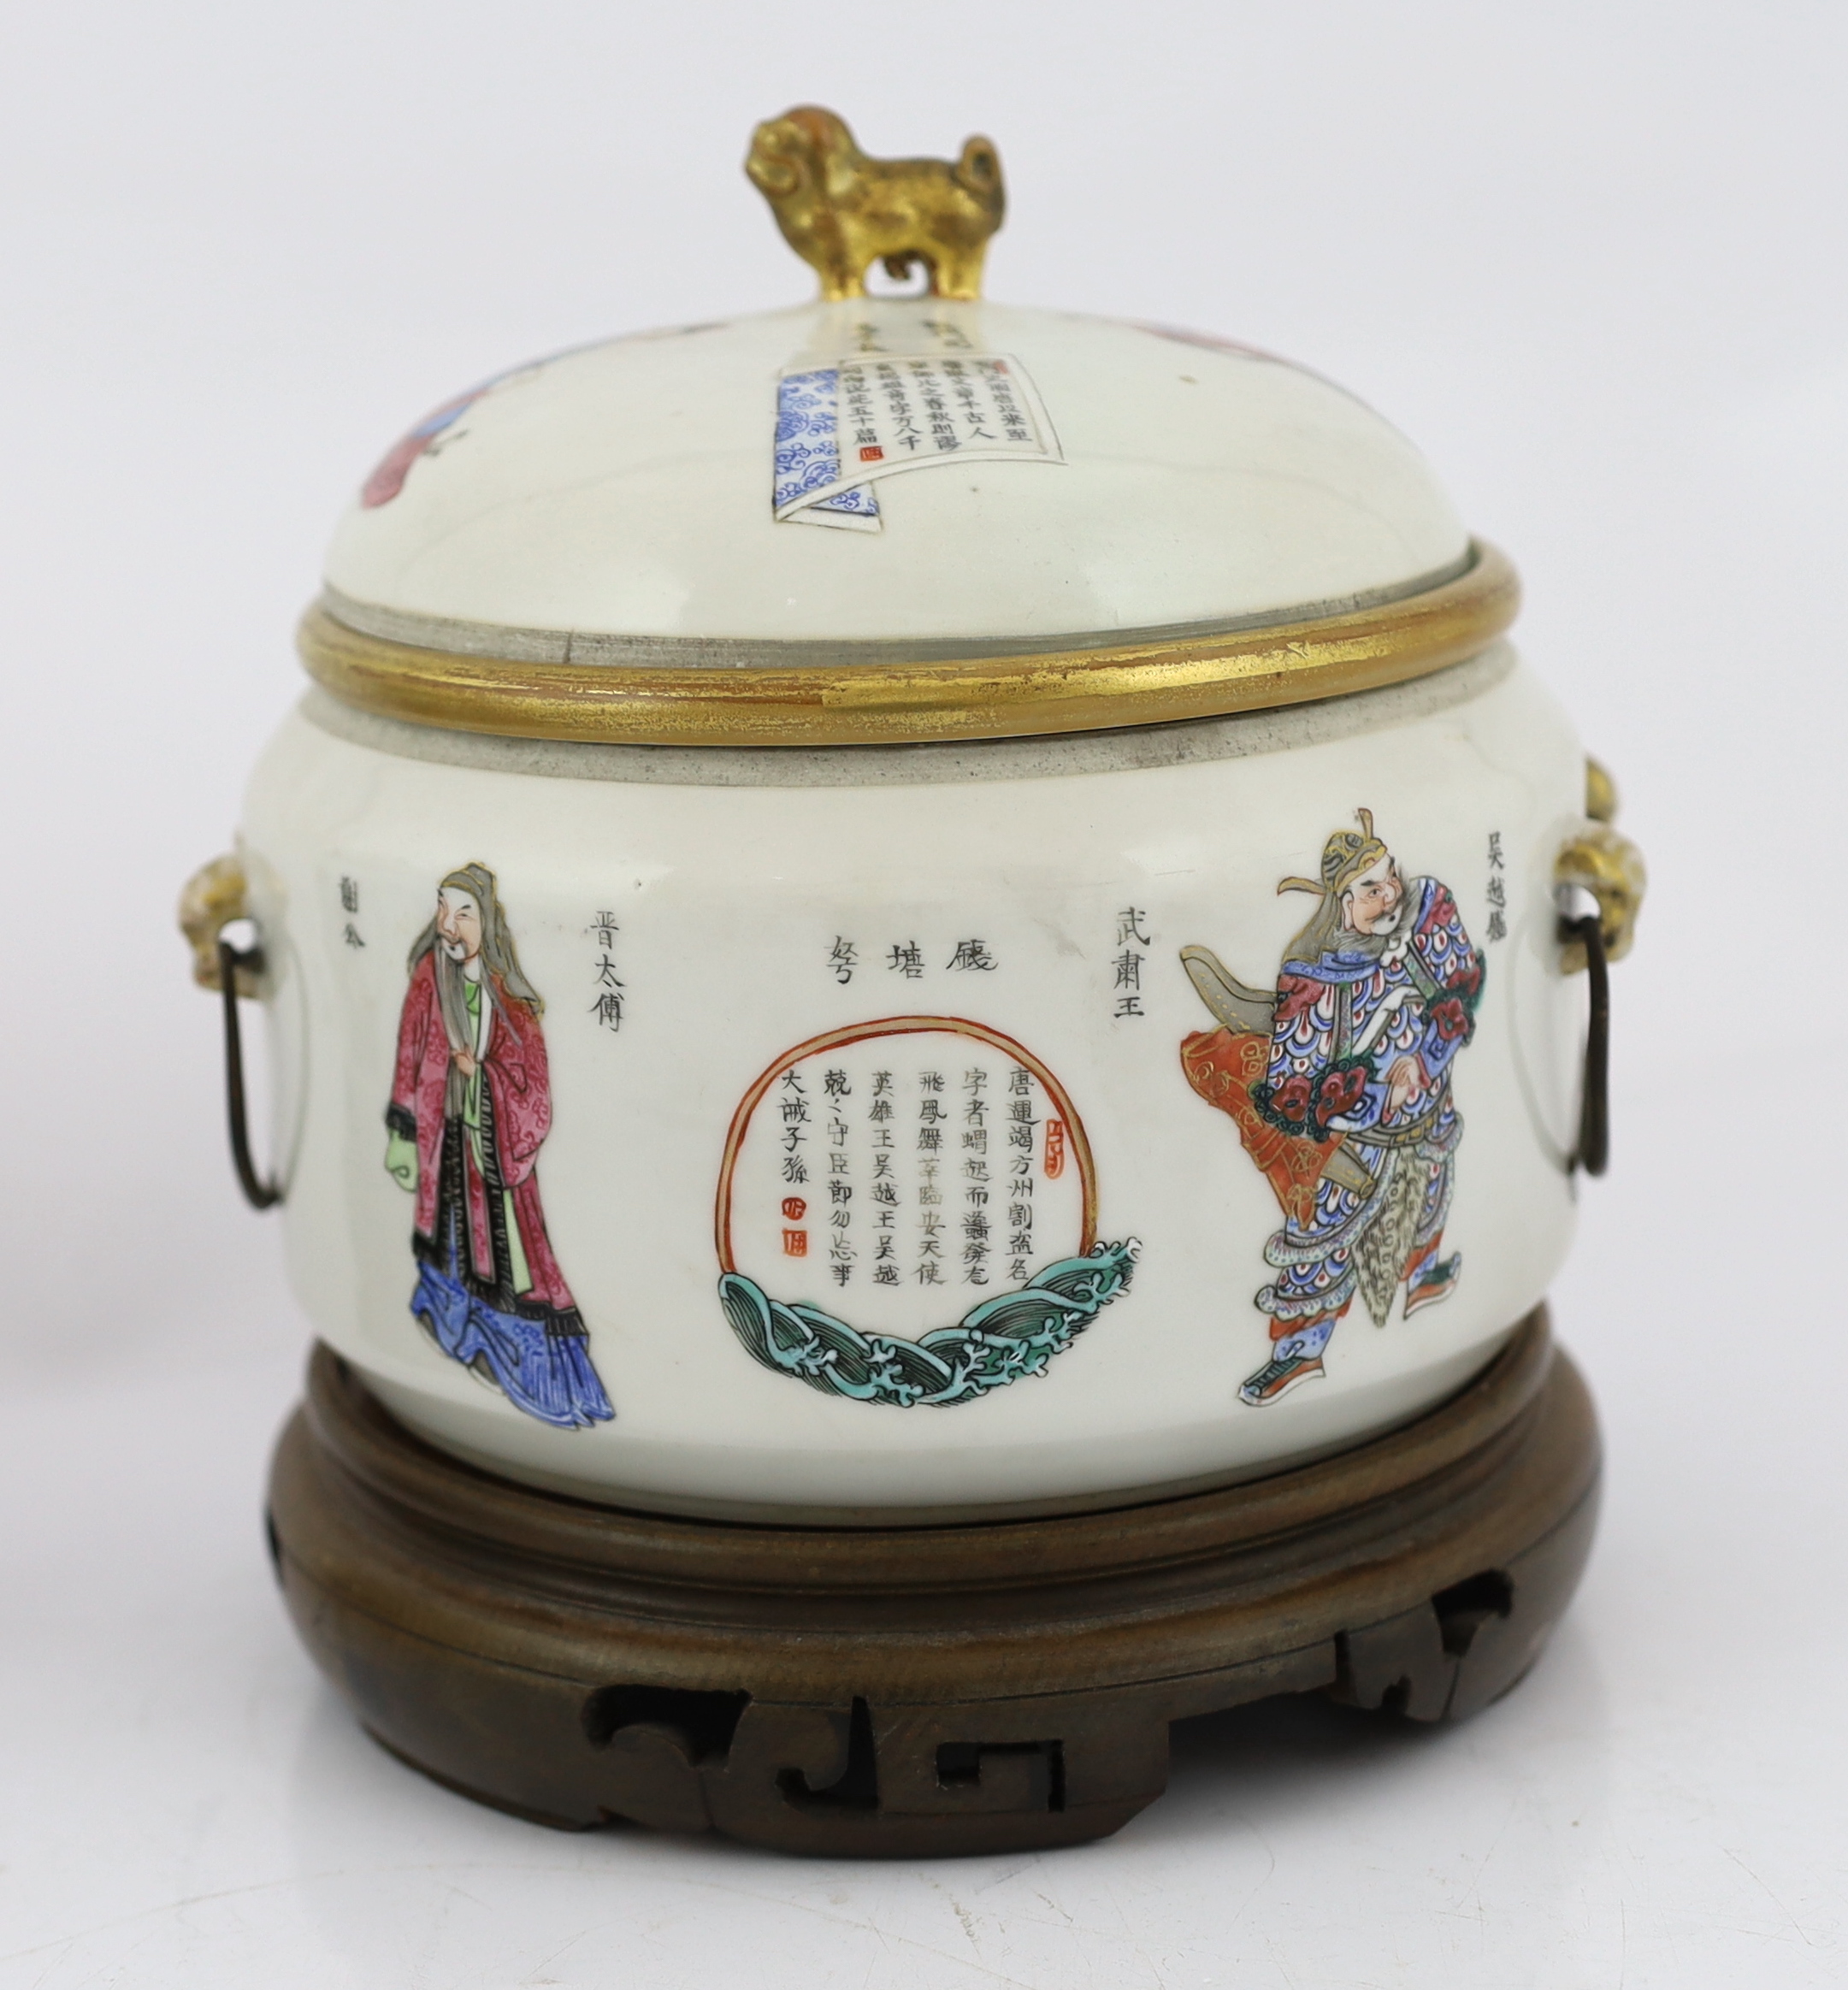 A pair of Chinese famille rose 'Wu Shuang Pu' porridge pots, liners and covers, Daoguang seal marks and of the period (1821-50), star crack to one base